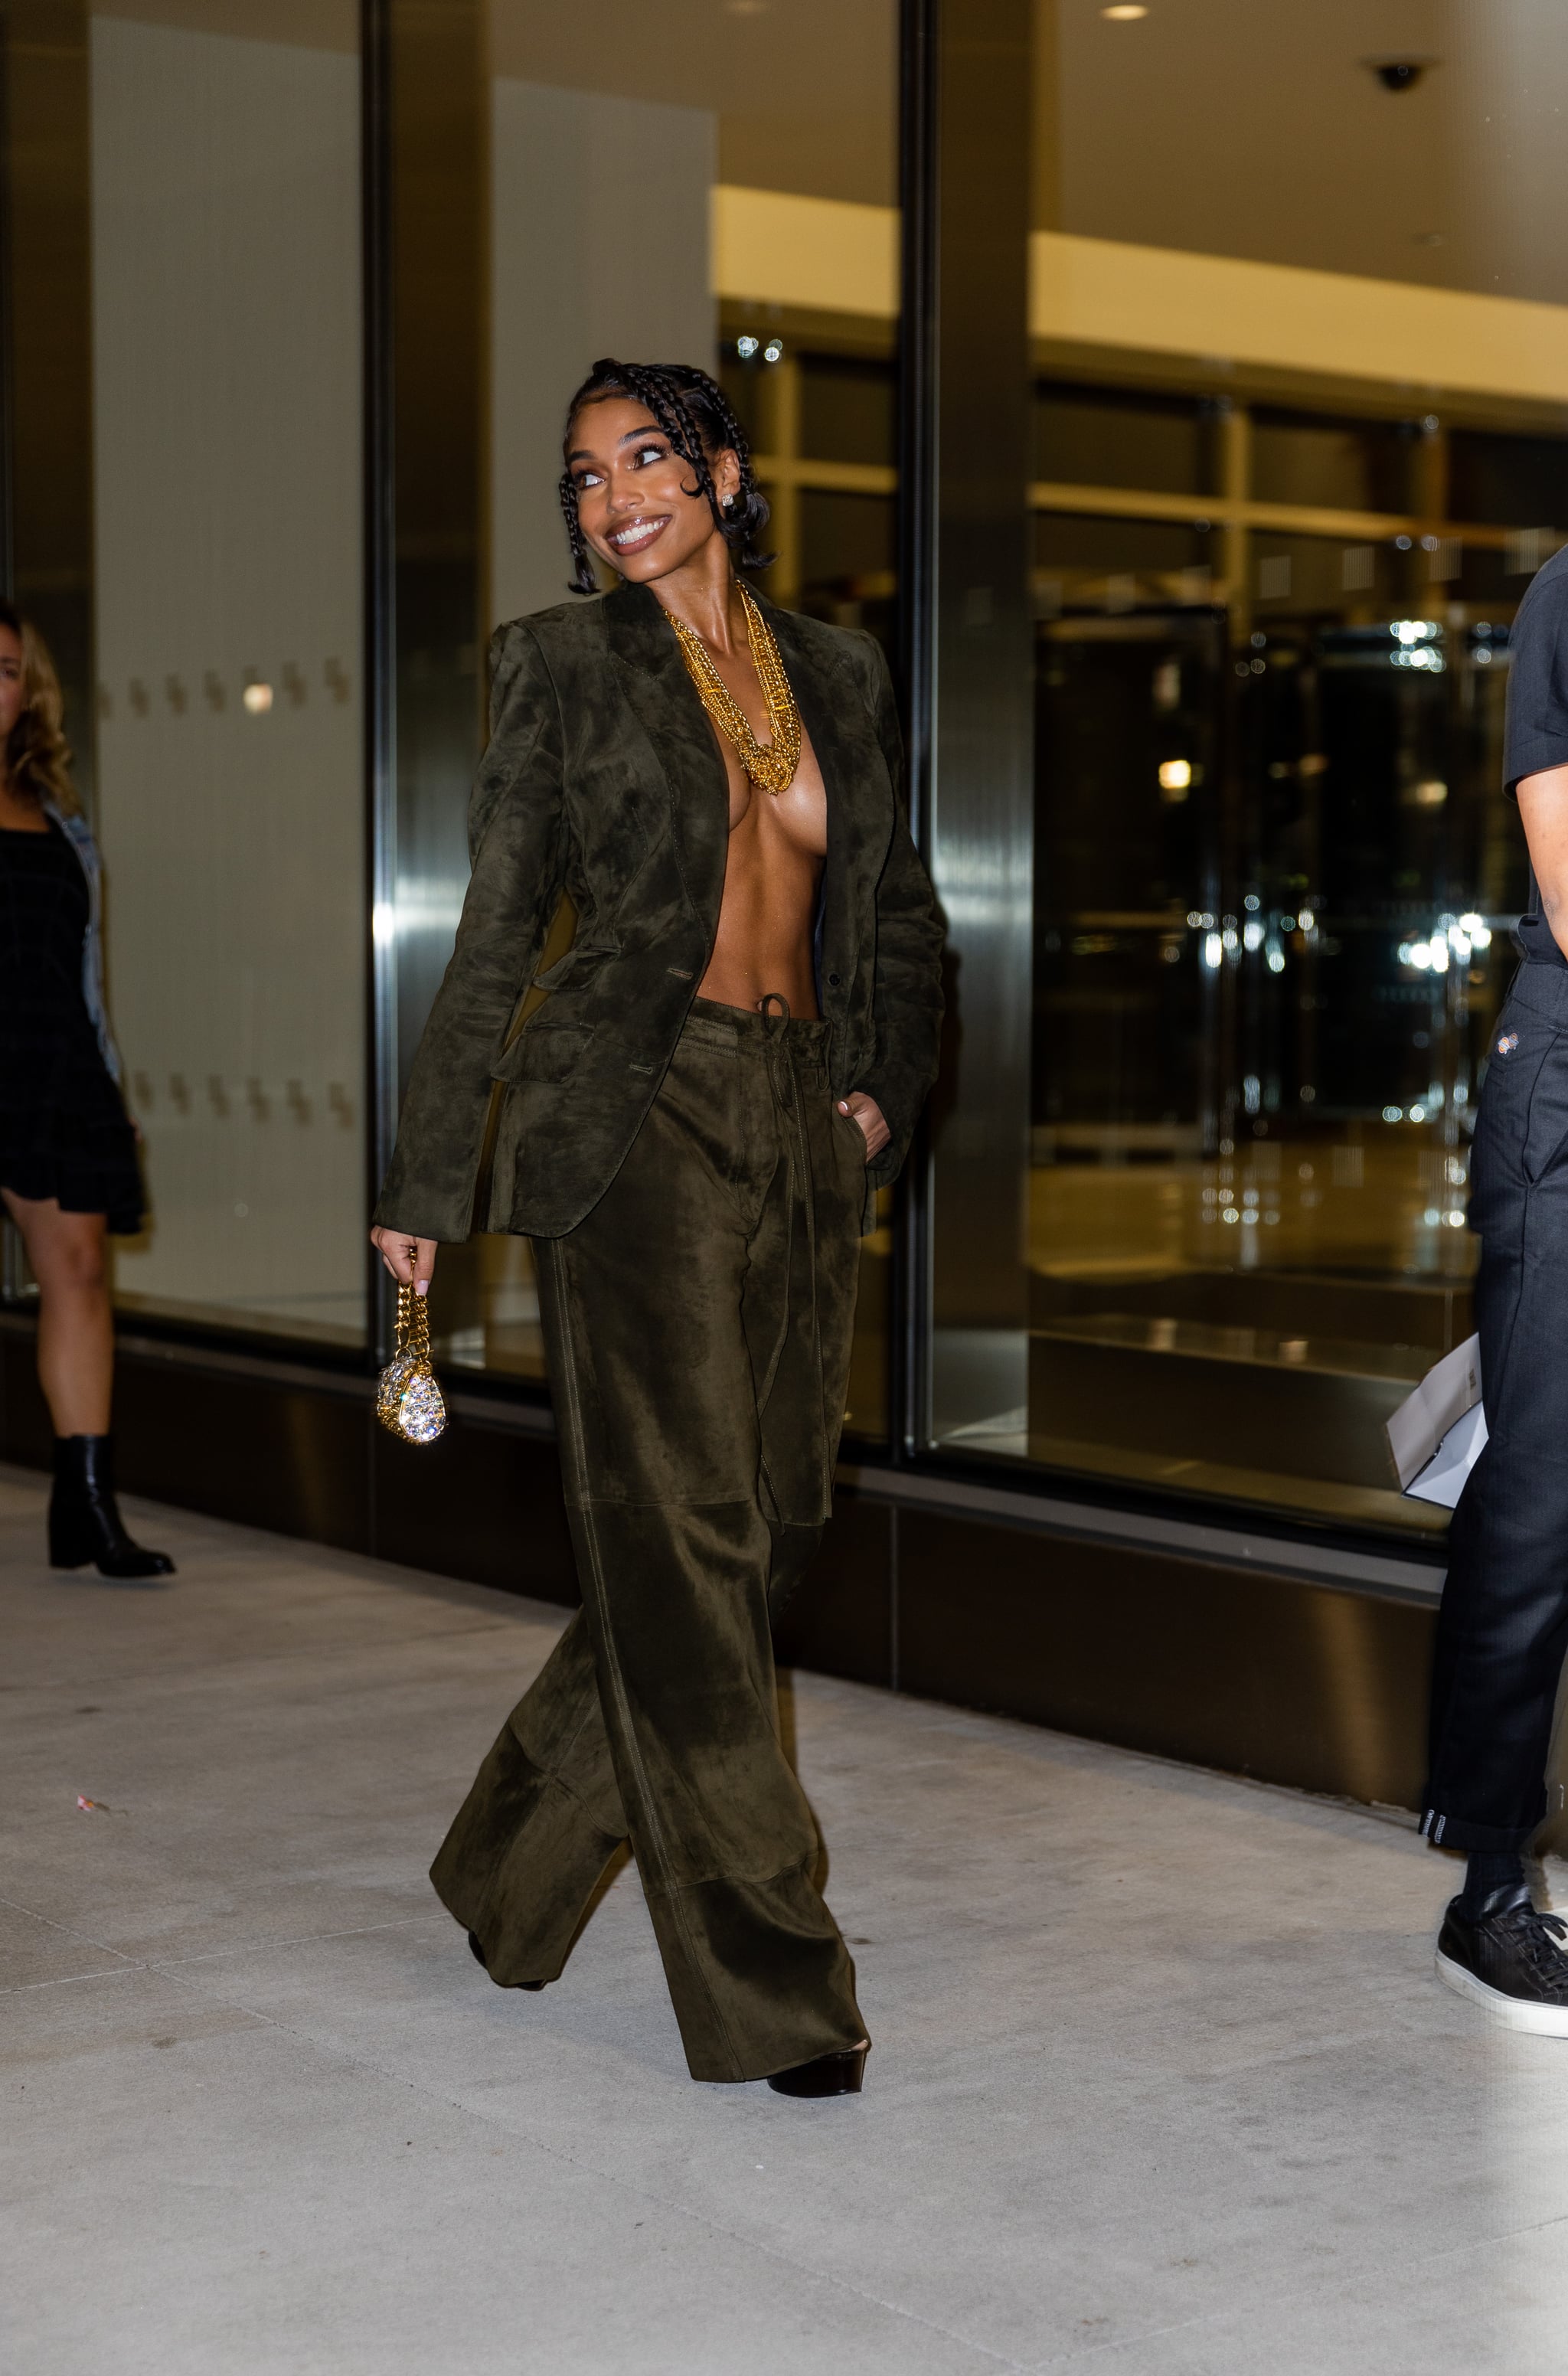 NEW YORK, NEW YORK - SEPTEMBER 14: Lori Harvey wearing khaki blazer and pants, micro bag outside Tom Ford on September 14, 2022 in New York City. (Photo by Christian Vierig/Getty Images)